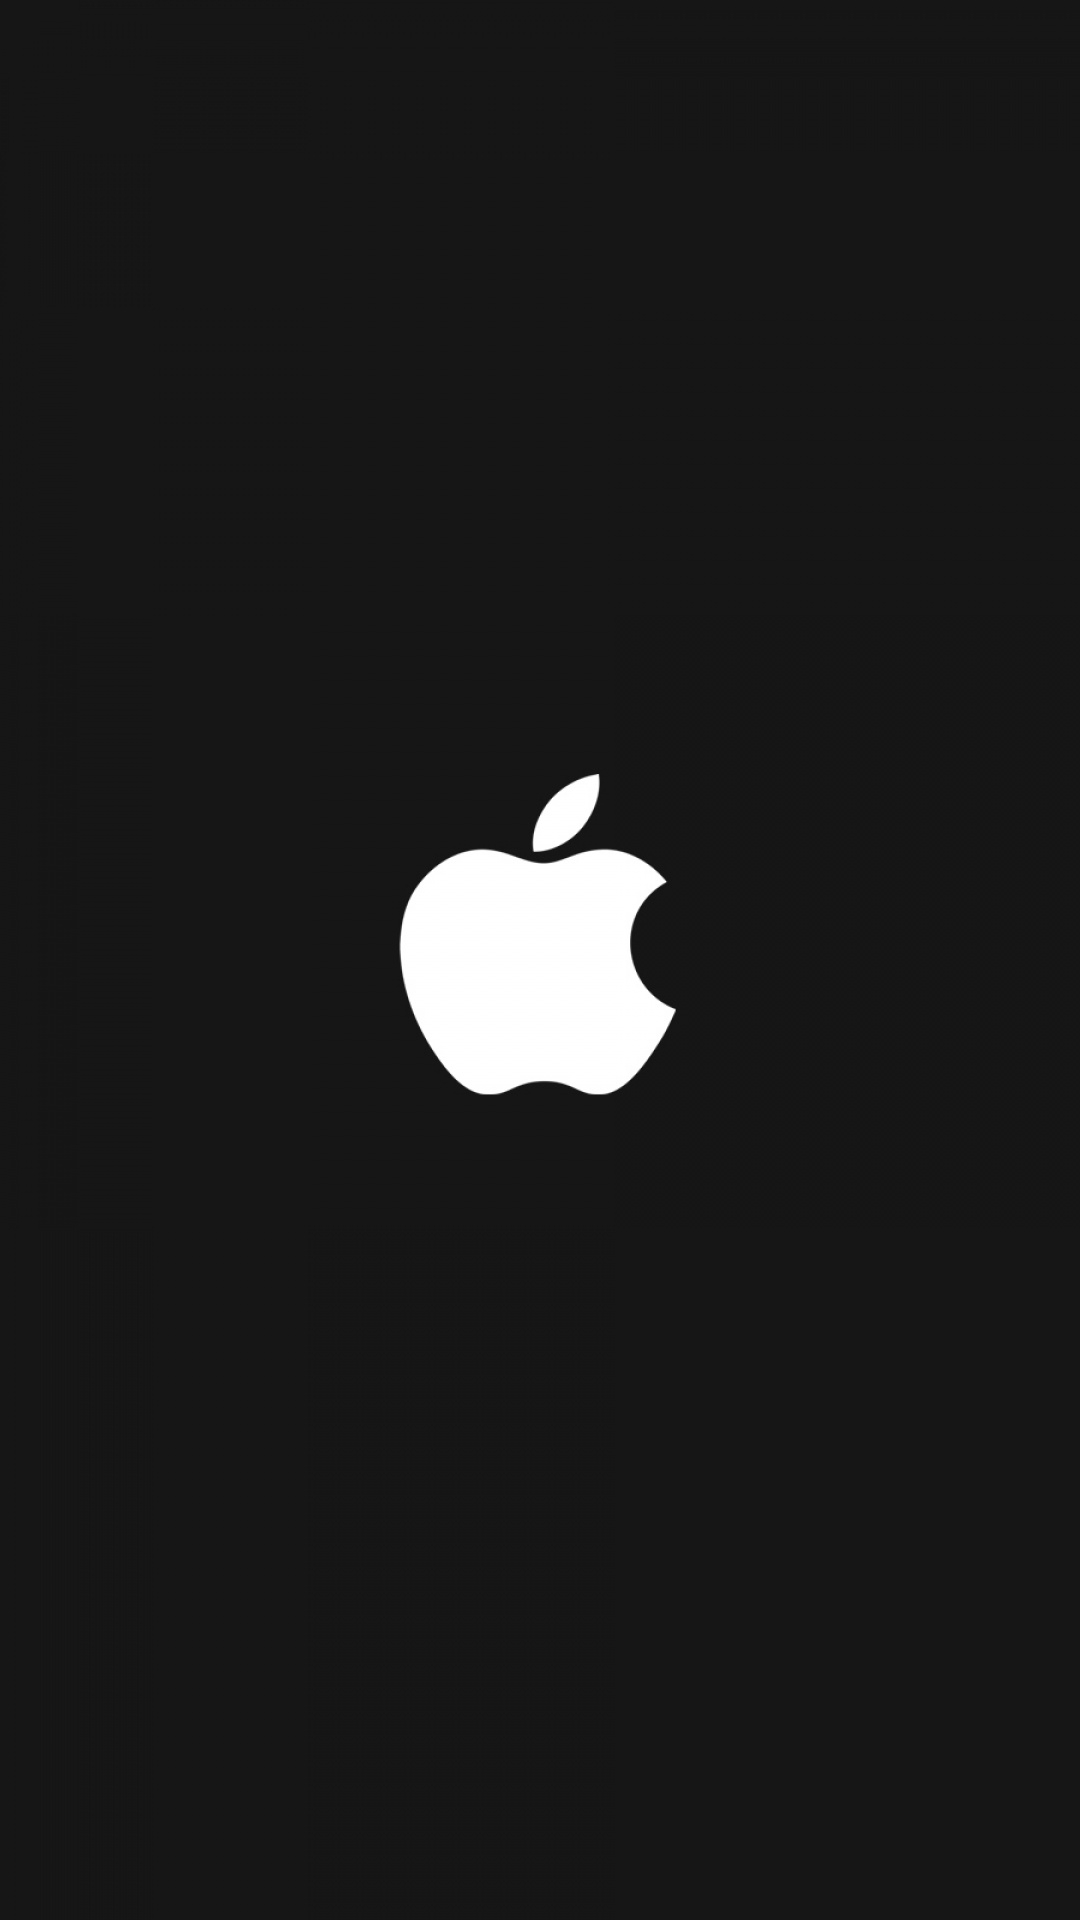 Free Download Iphone 6 Plus Wallpaper Apple Logo 02 Iphone 6 Wallpapers 1080x19 For Your Desktop Mobile Tablet Explore 46 Apple Iphone 6 Plus Wallpaper Iphone 6s Plus Live